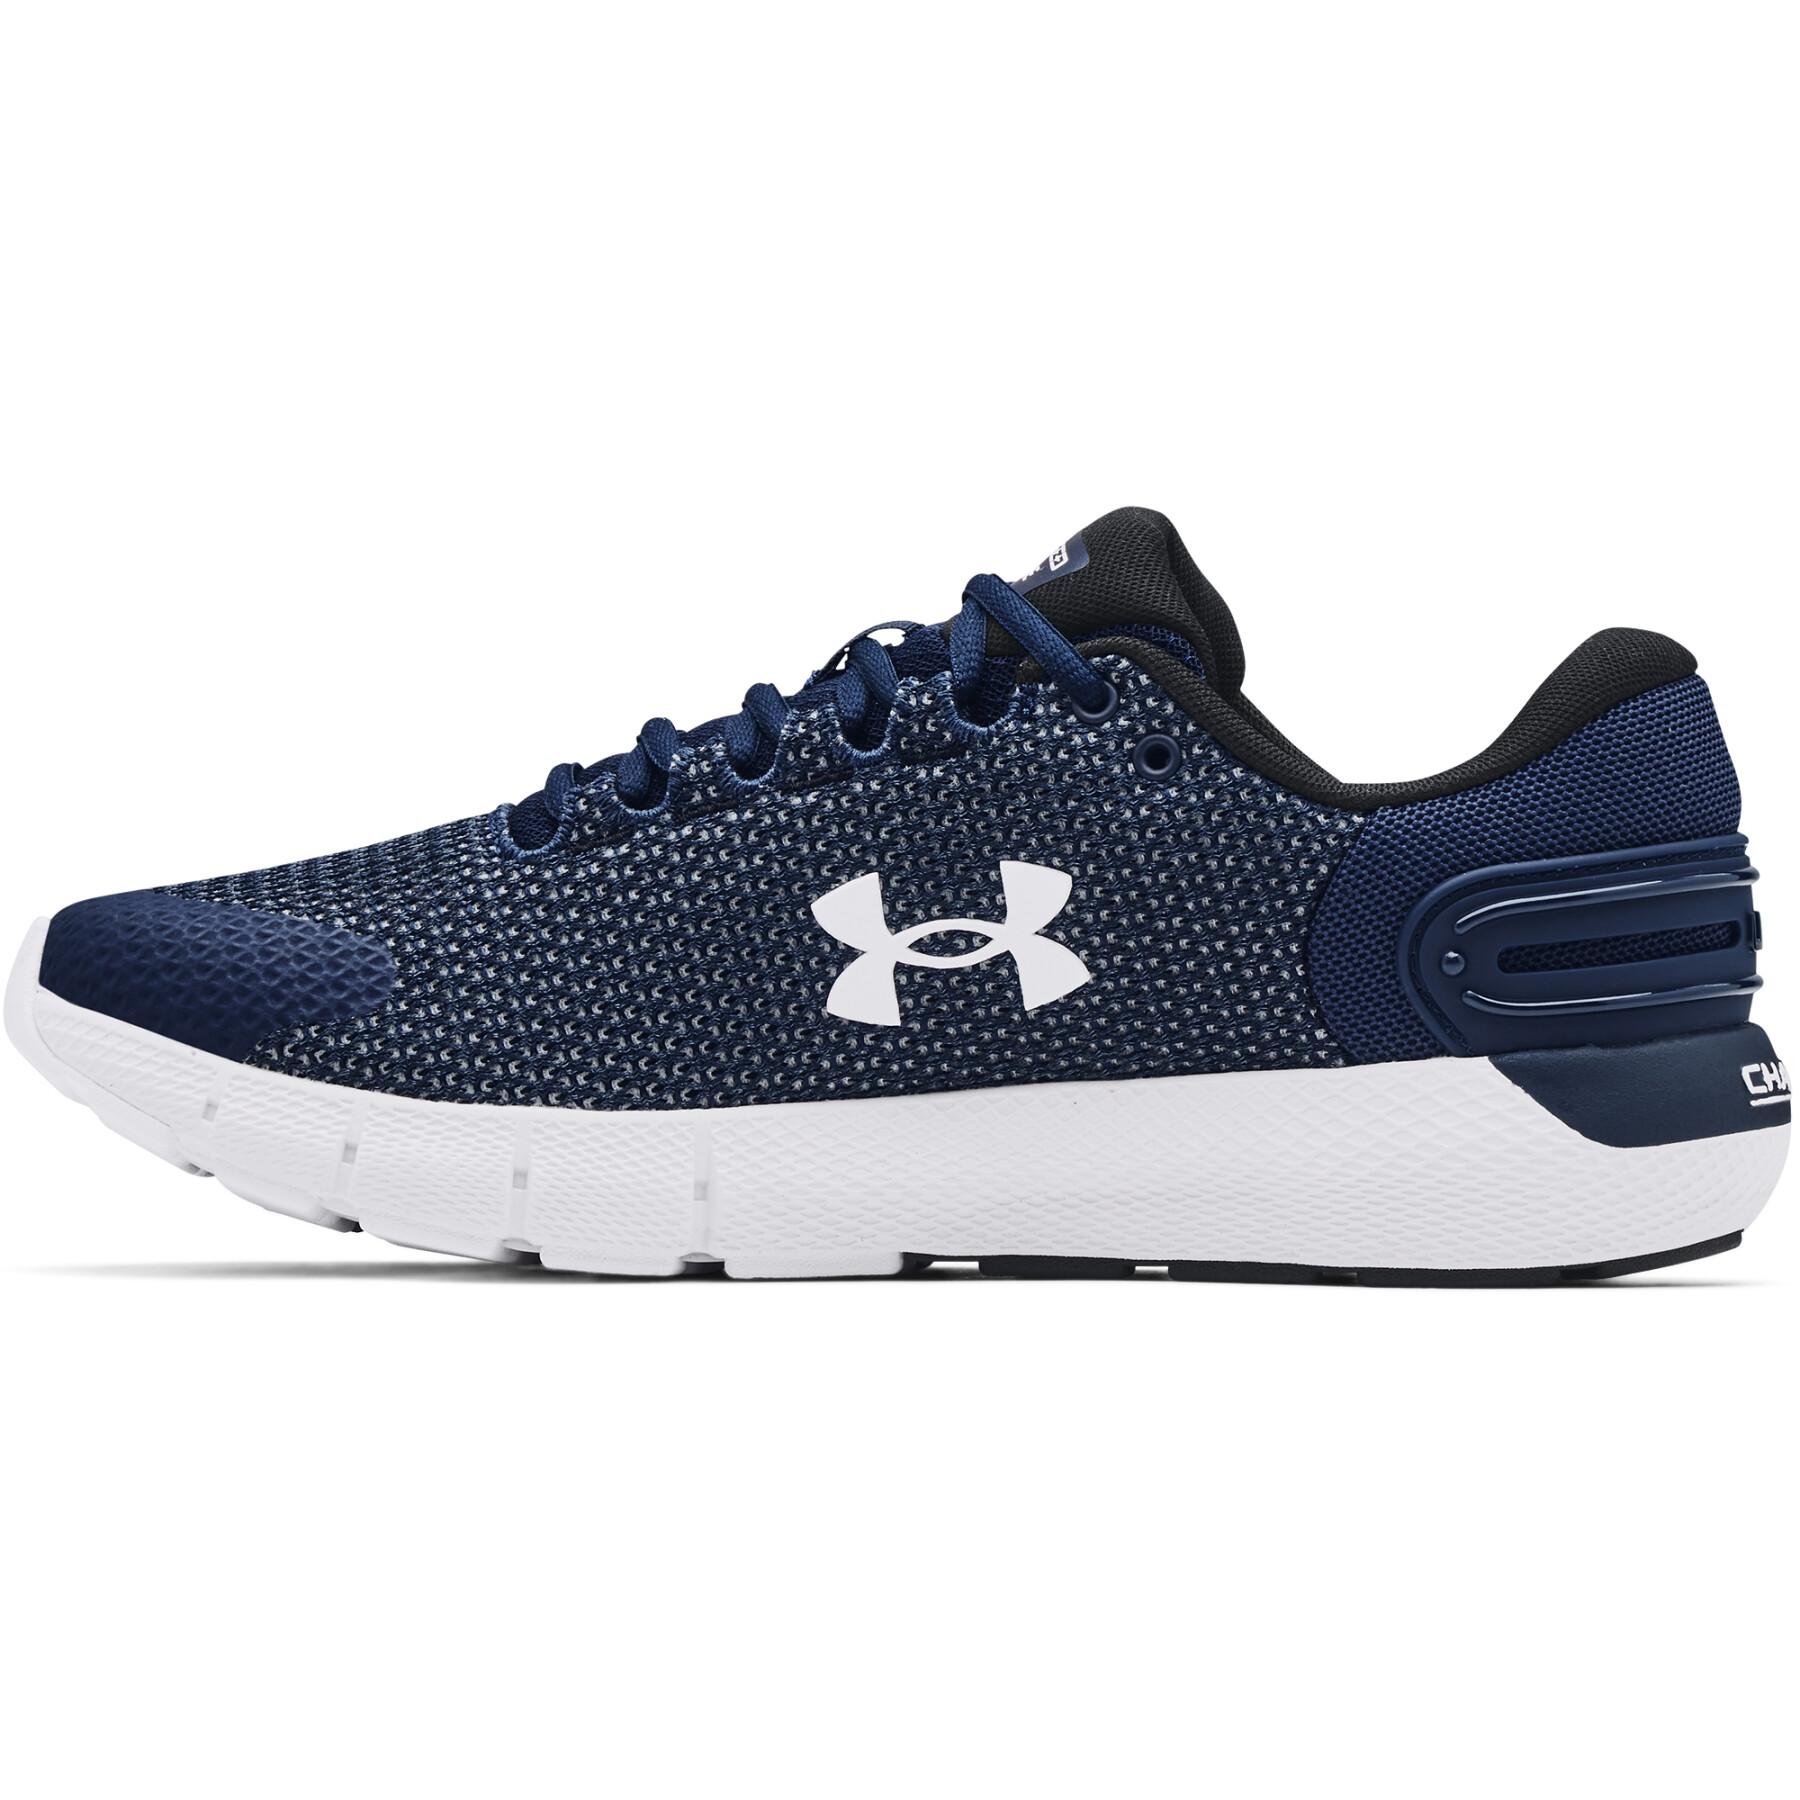 Zapatos Under Armour Charged Rogue 2.5